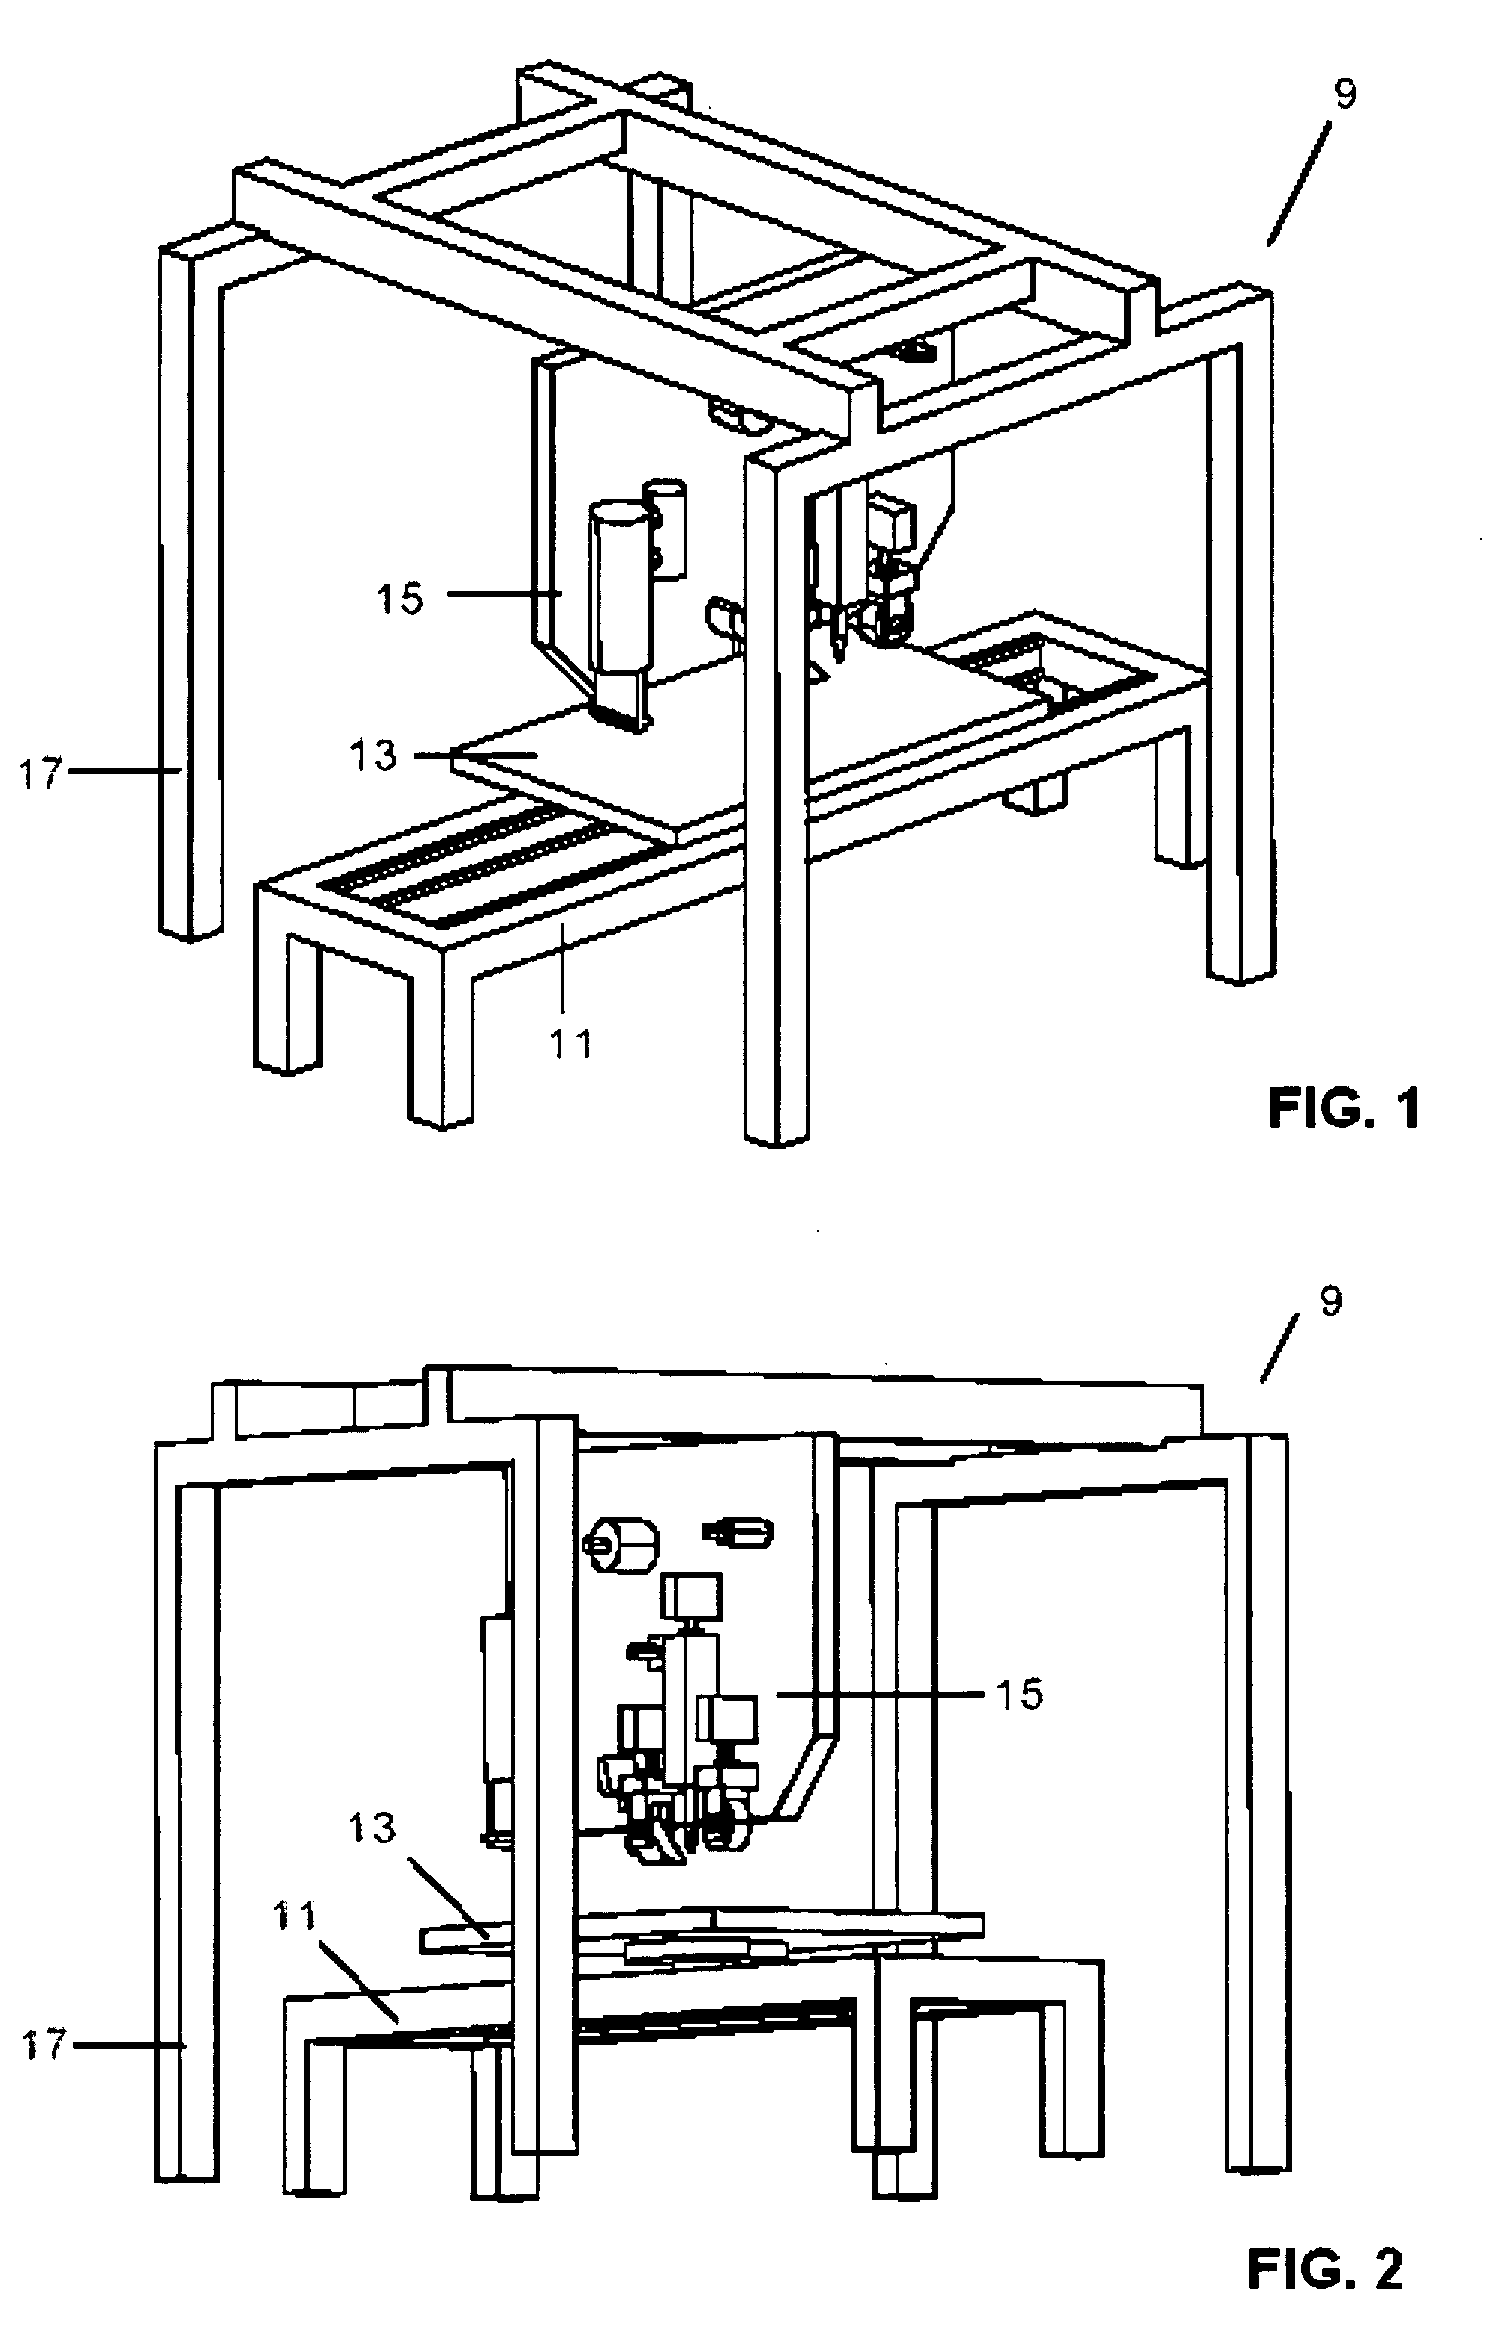 Jig and out-of-autoclave process for manufacturing composite material structures